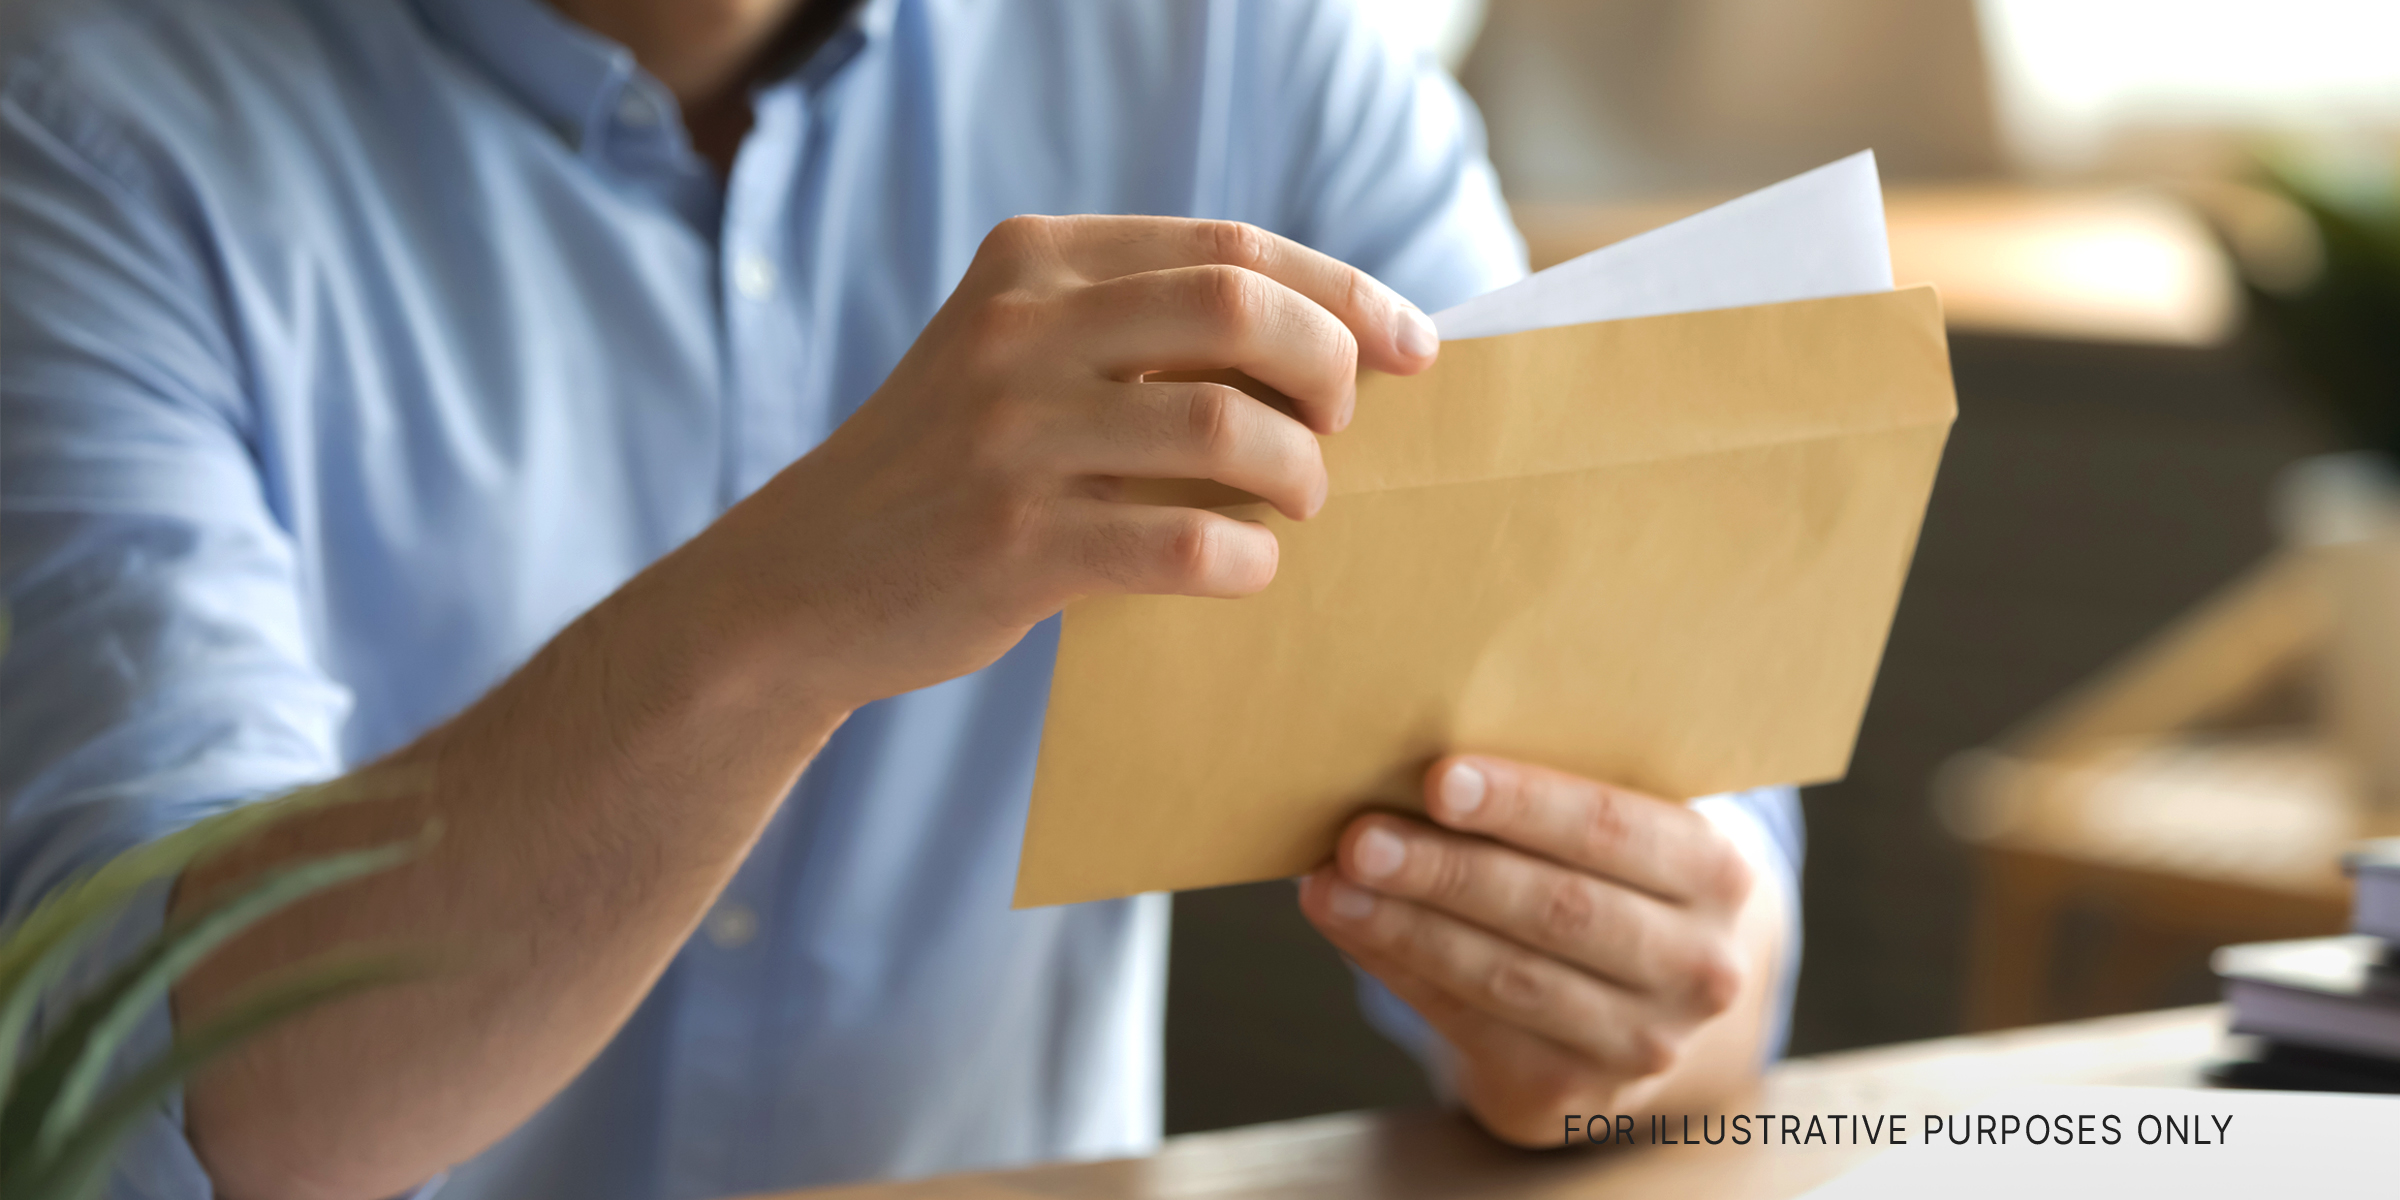 A man opening an envelope and removing a letter | Source: Shutterstock